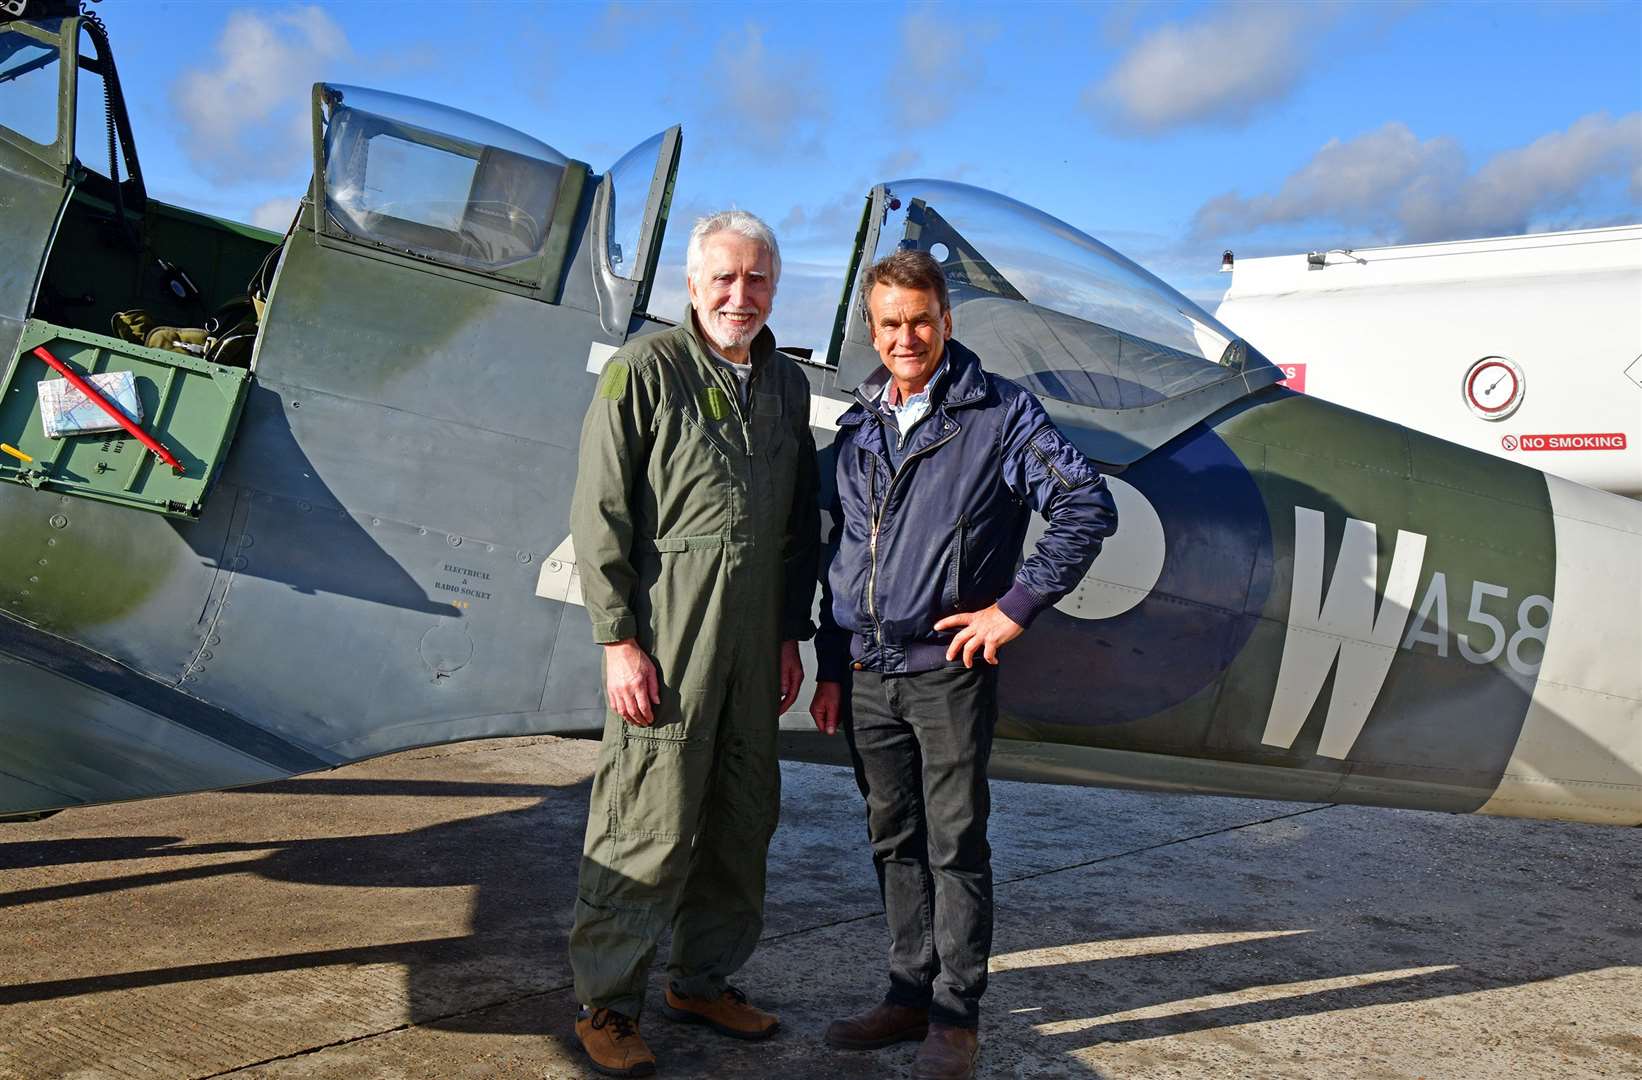 Peter Arnold, pictured with owner and pilot Peter Monk, was reunited with the first Spitfire he ever flew 50 years ago which is now based at the Biggin Hill Heritage Hangar. He was treated to a flight over Kent including landmarks such as Leeds Castle. Picture: Richard Paver/Biggin Hill Heritage Hangar